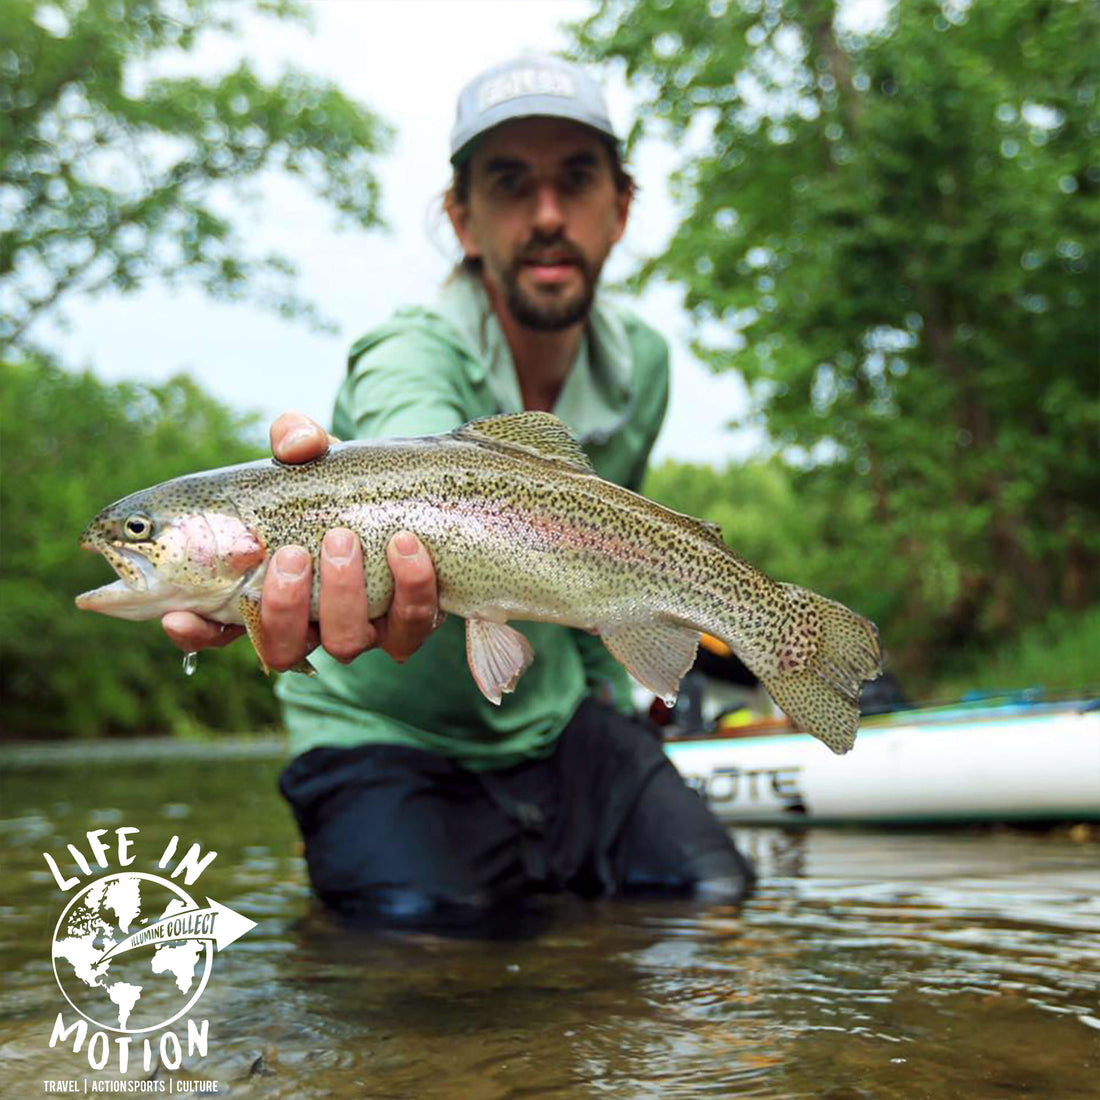 In the Flow - Exploring Rivers and Wilderness with Mark Malkowicz of Big Muddy Adventures